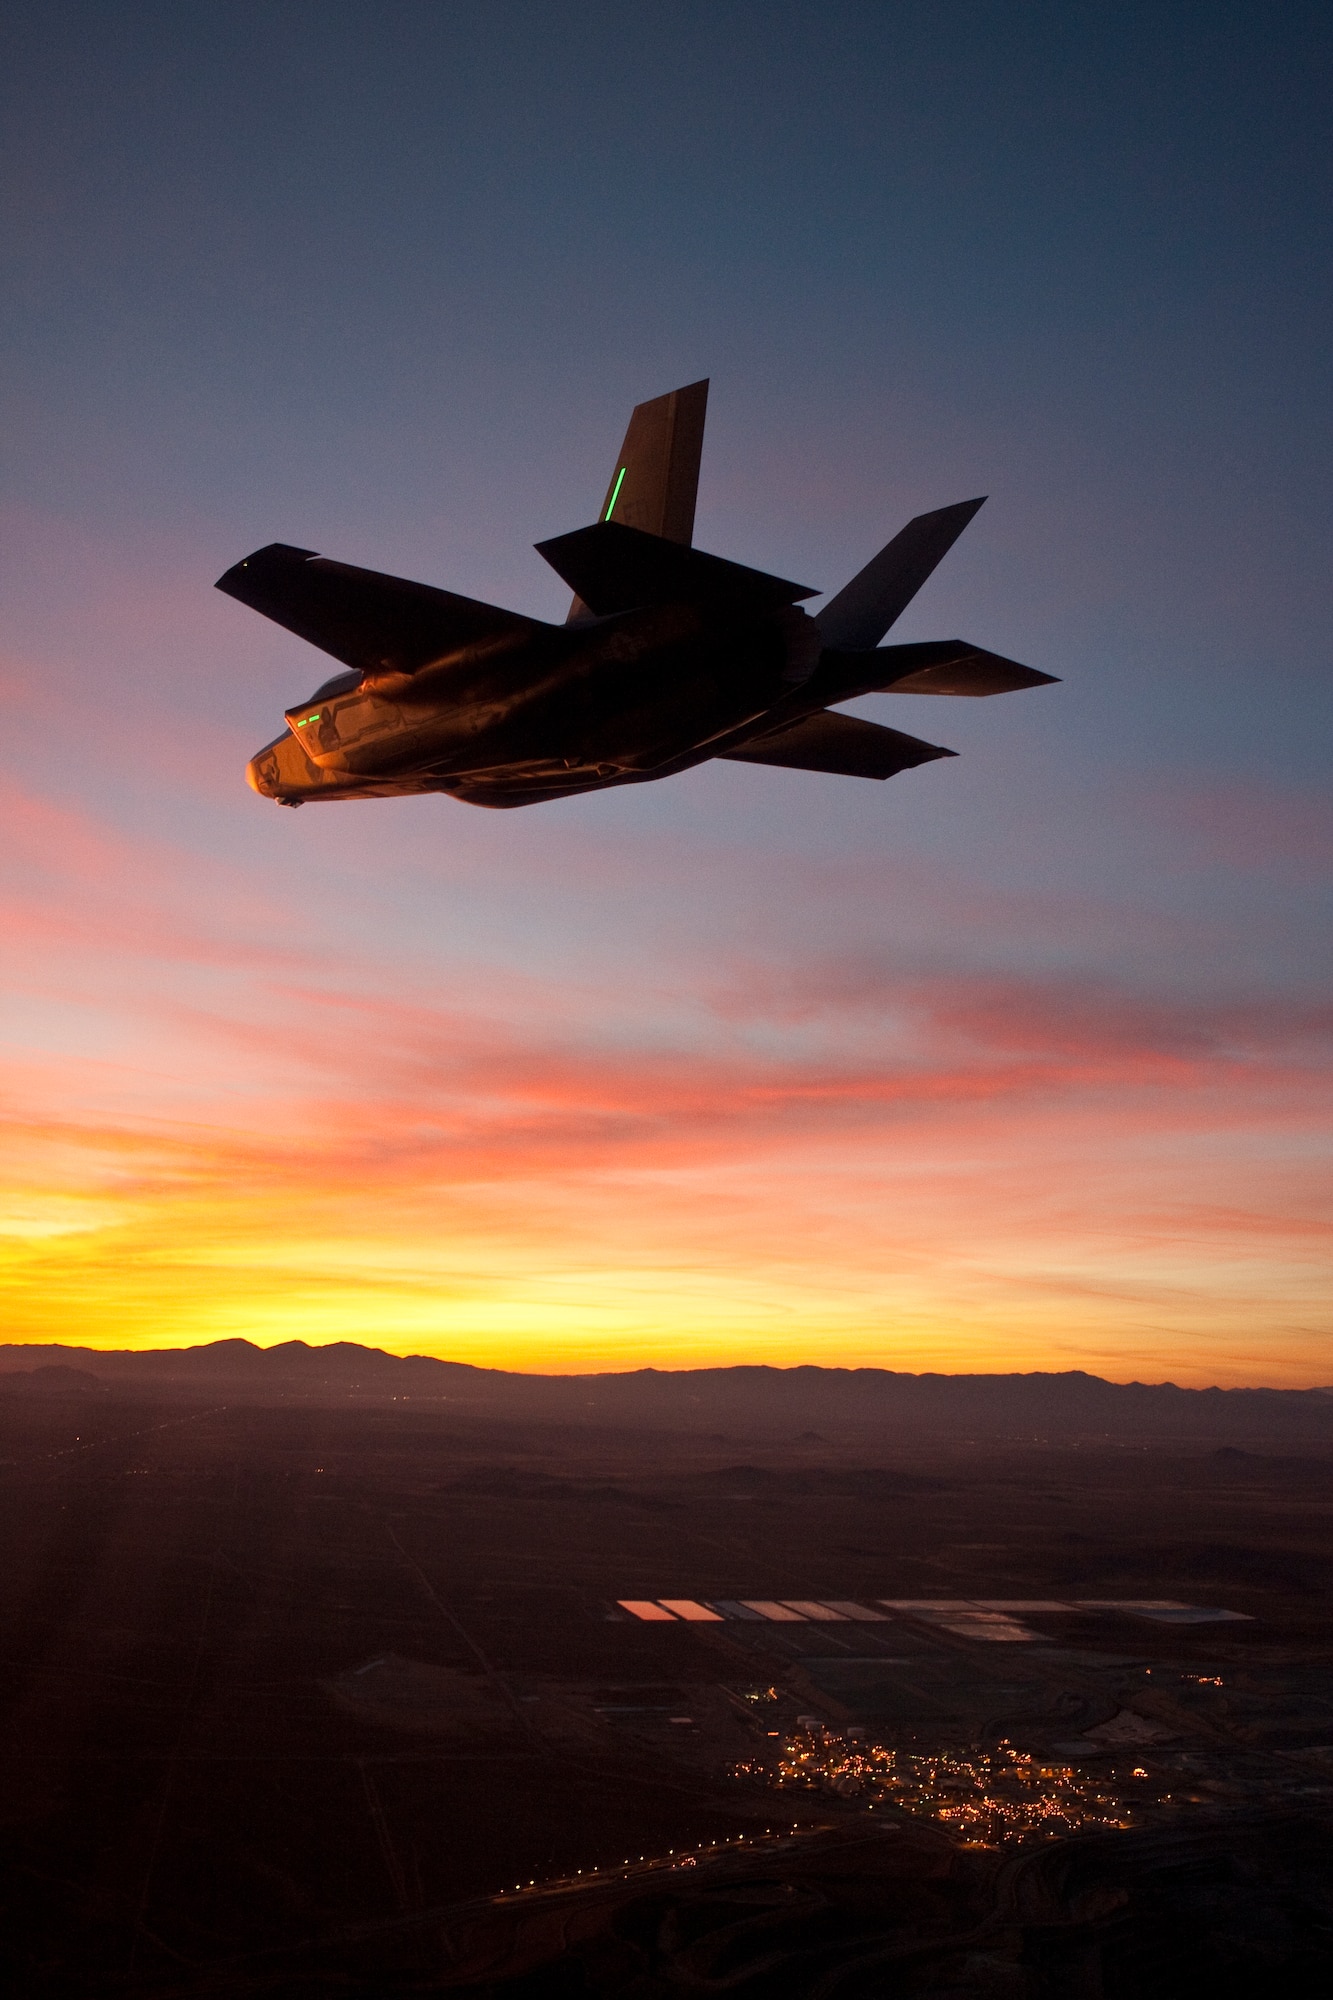 An F-35A soars during twilight over the Antelope Valley as part of the program’s first night fight test, Jan. 18. The 461st Flight Test Squadron, along with the Joint Strike Fighter Integrated Test Force, conducted the test to verify the aircraft’s lighting capabilities at night. (Lockheed Martin photo by Tom Reynolds)